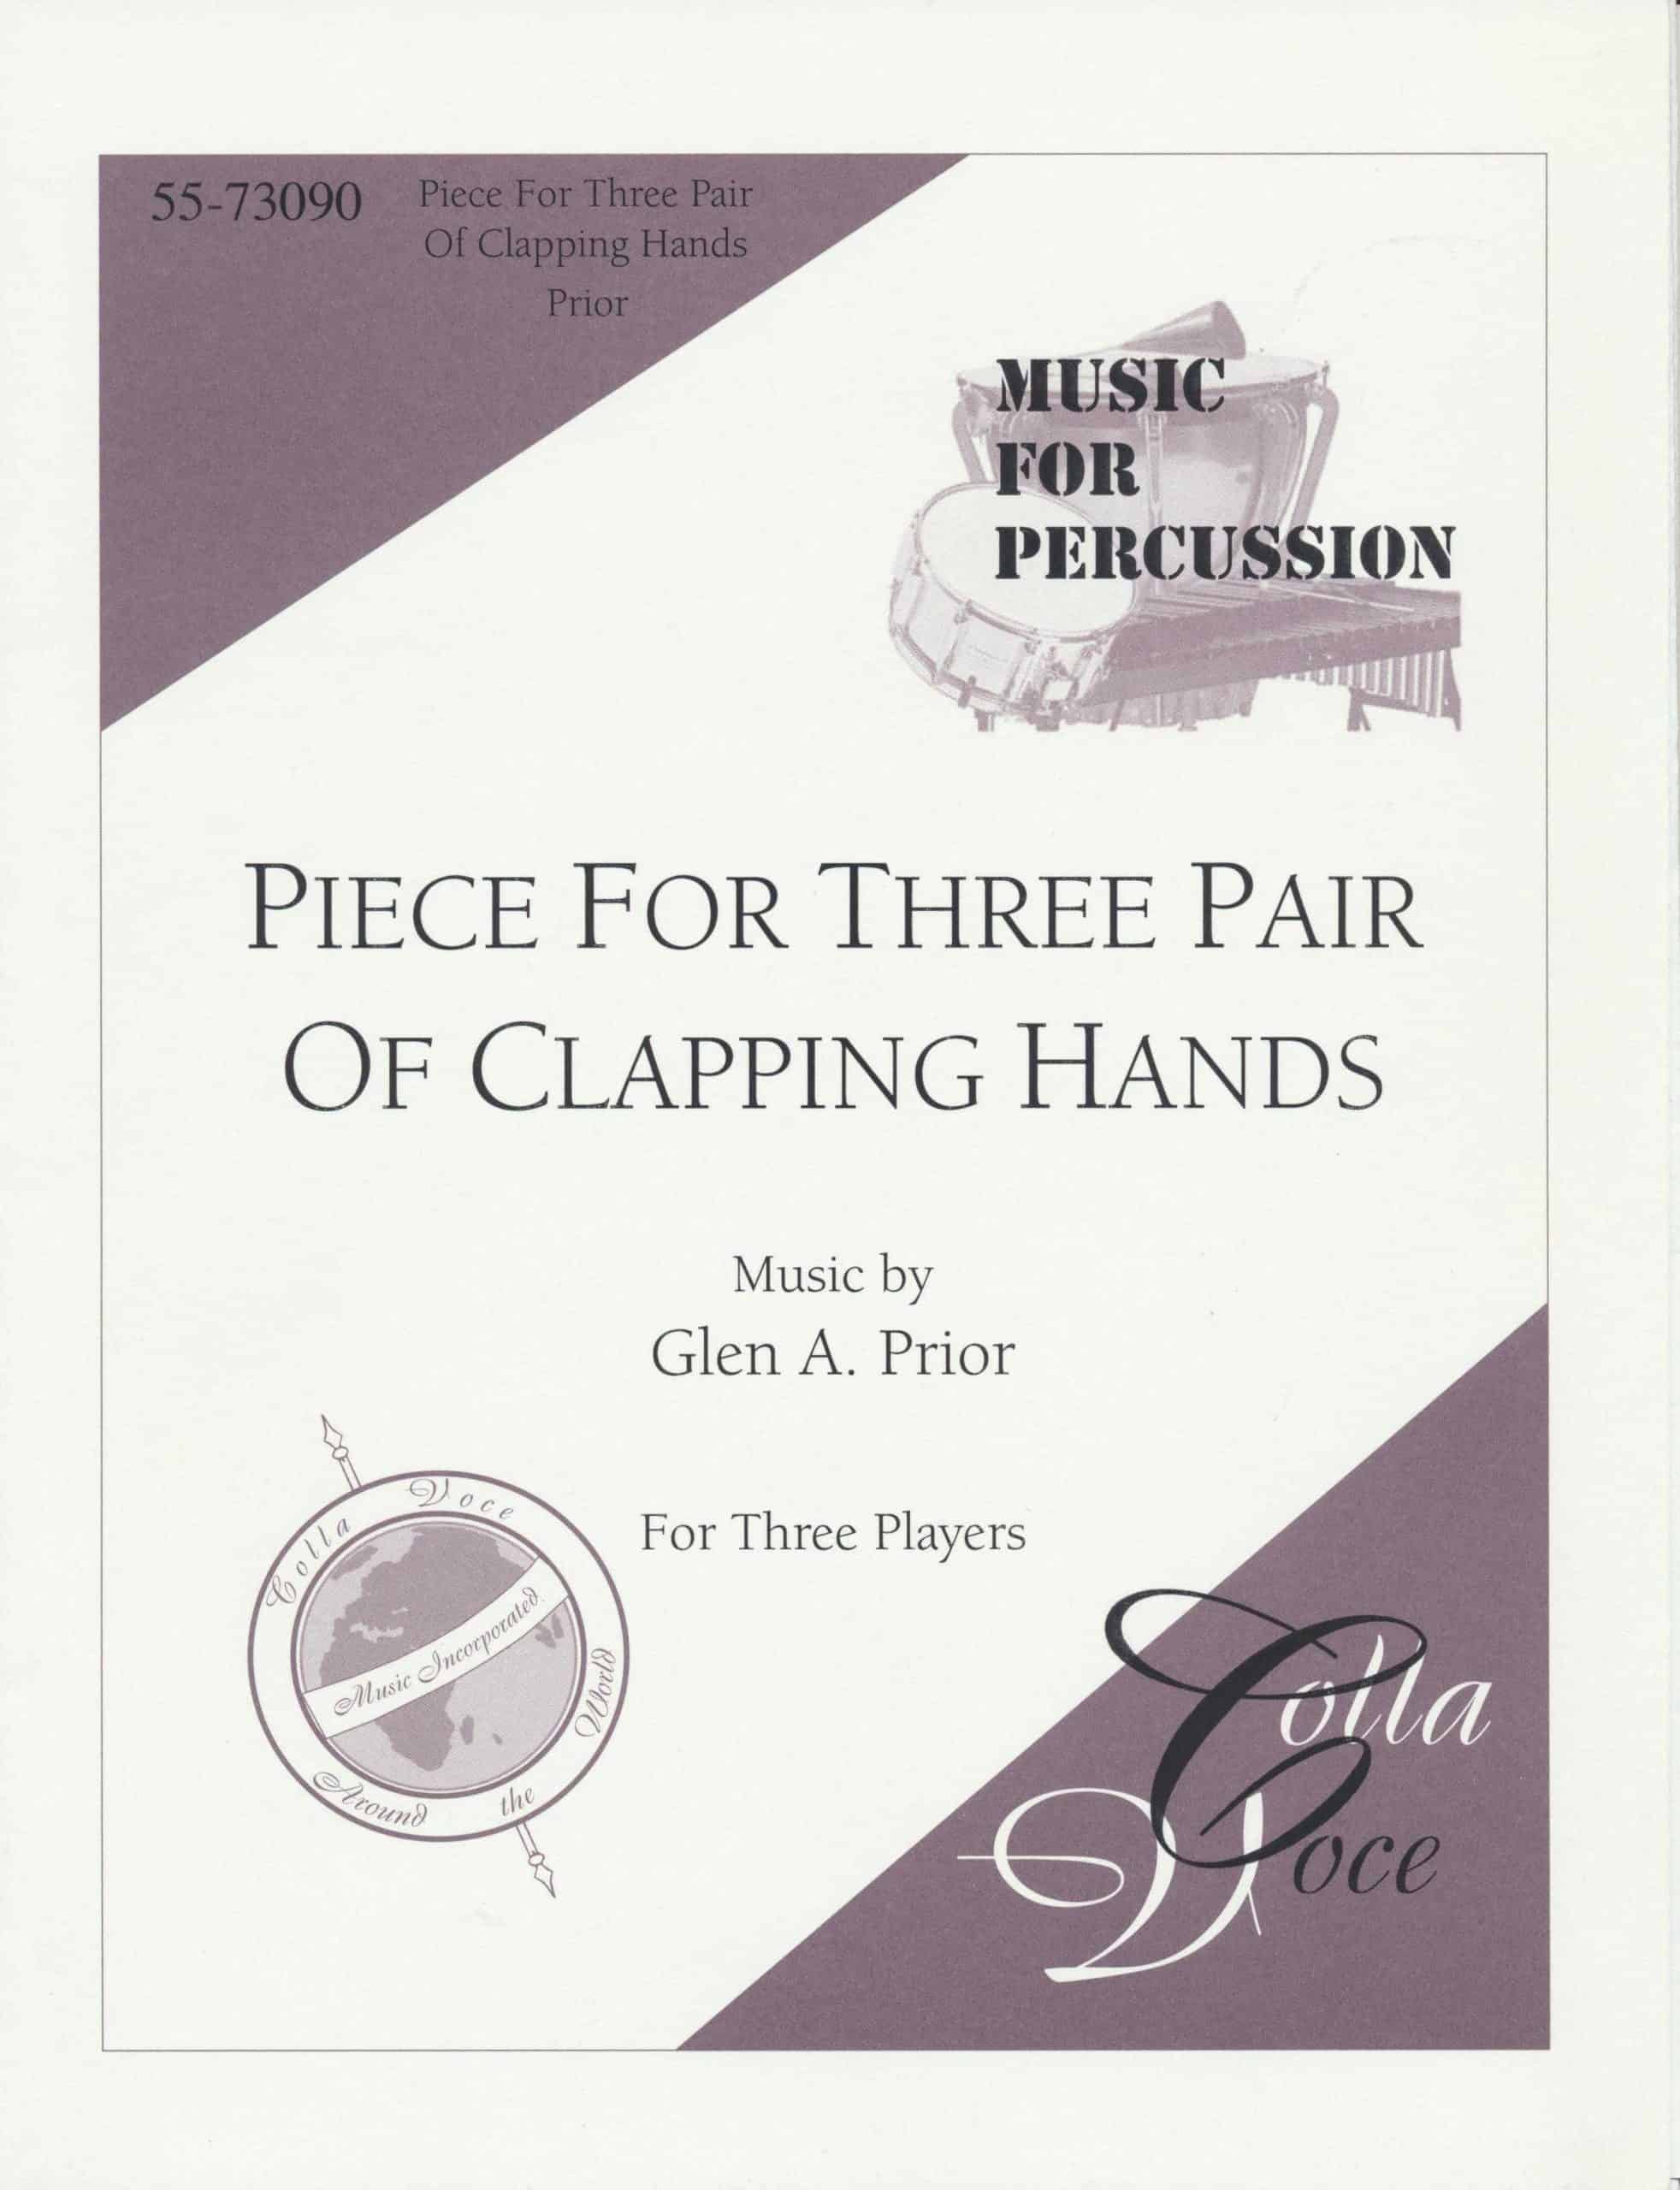 Piece For Three Pairs Of Clapping Hands by Glen Prior